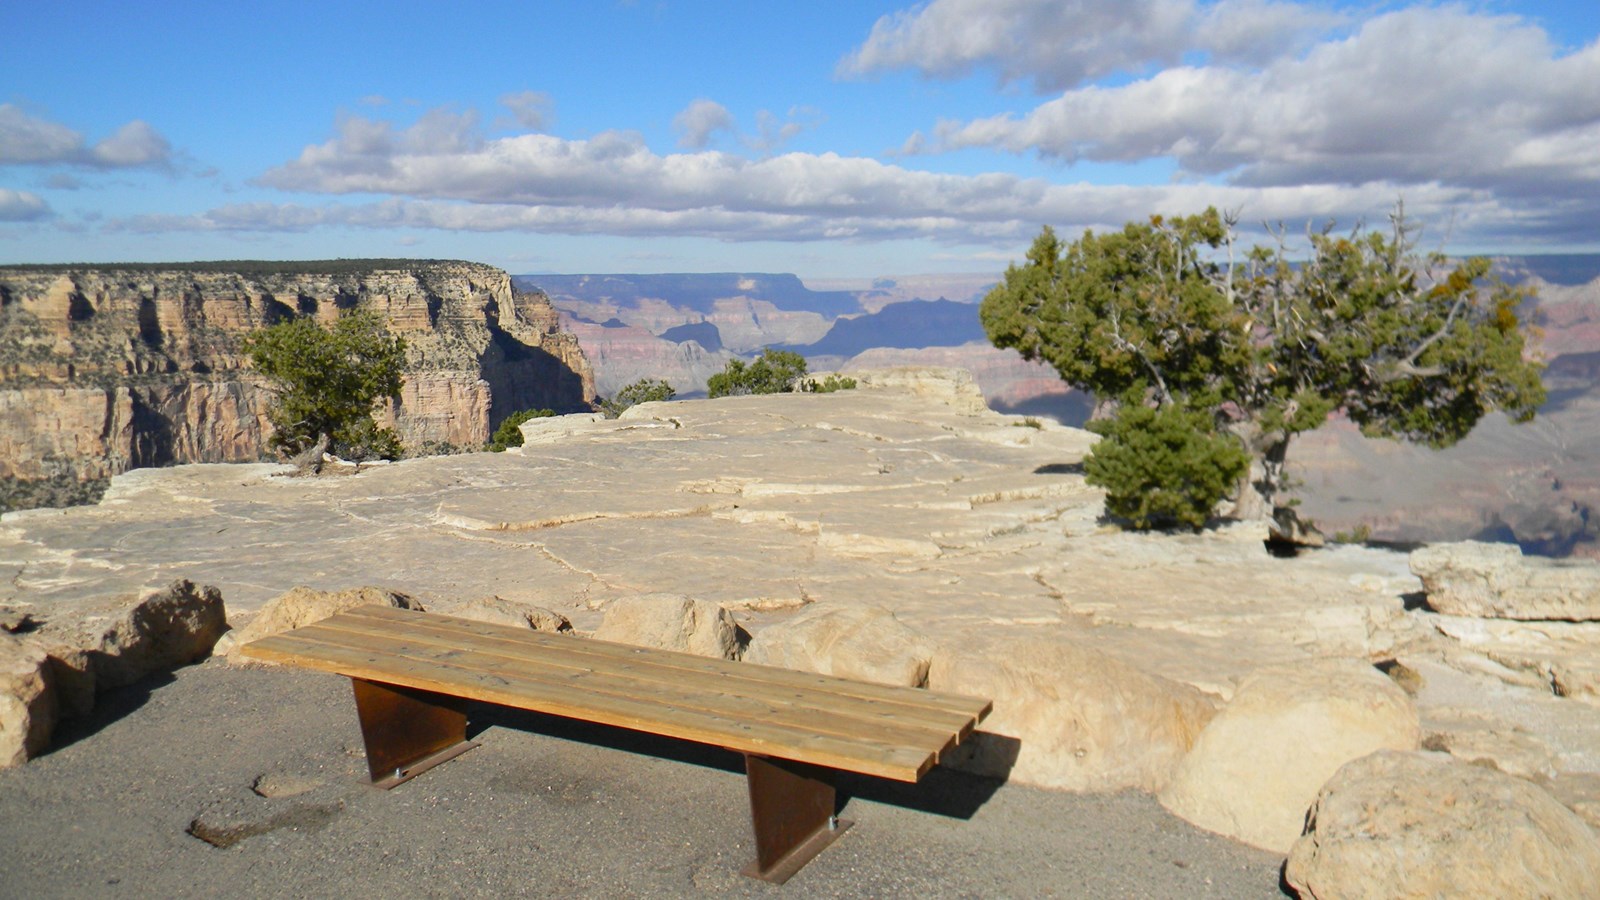 A wooden bench sits at the edge of a paved path next to a large, open outcrop of flat white rock.